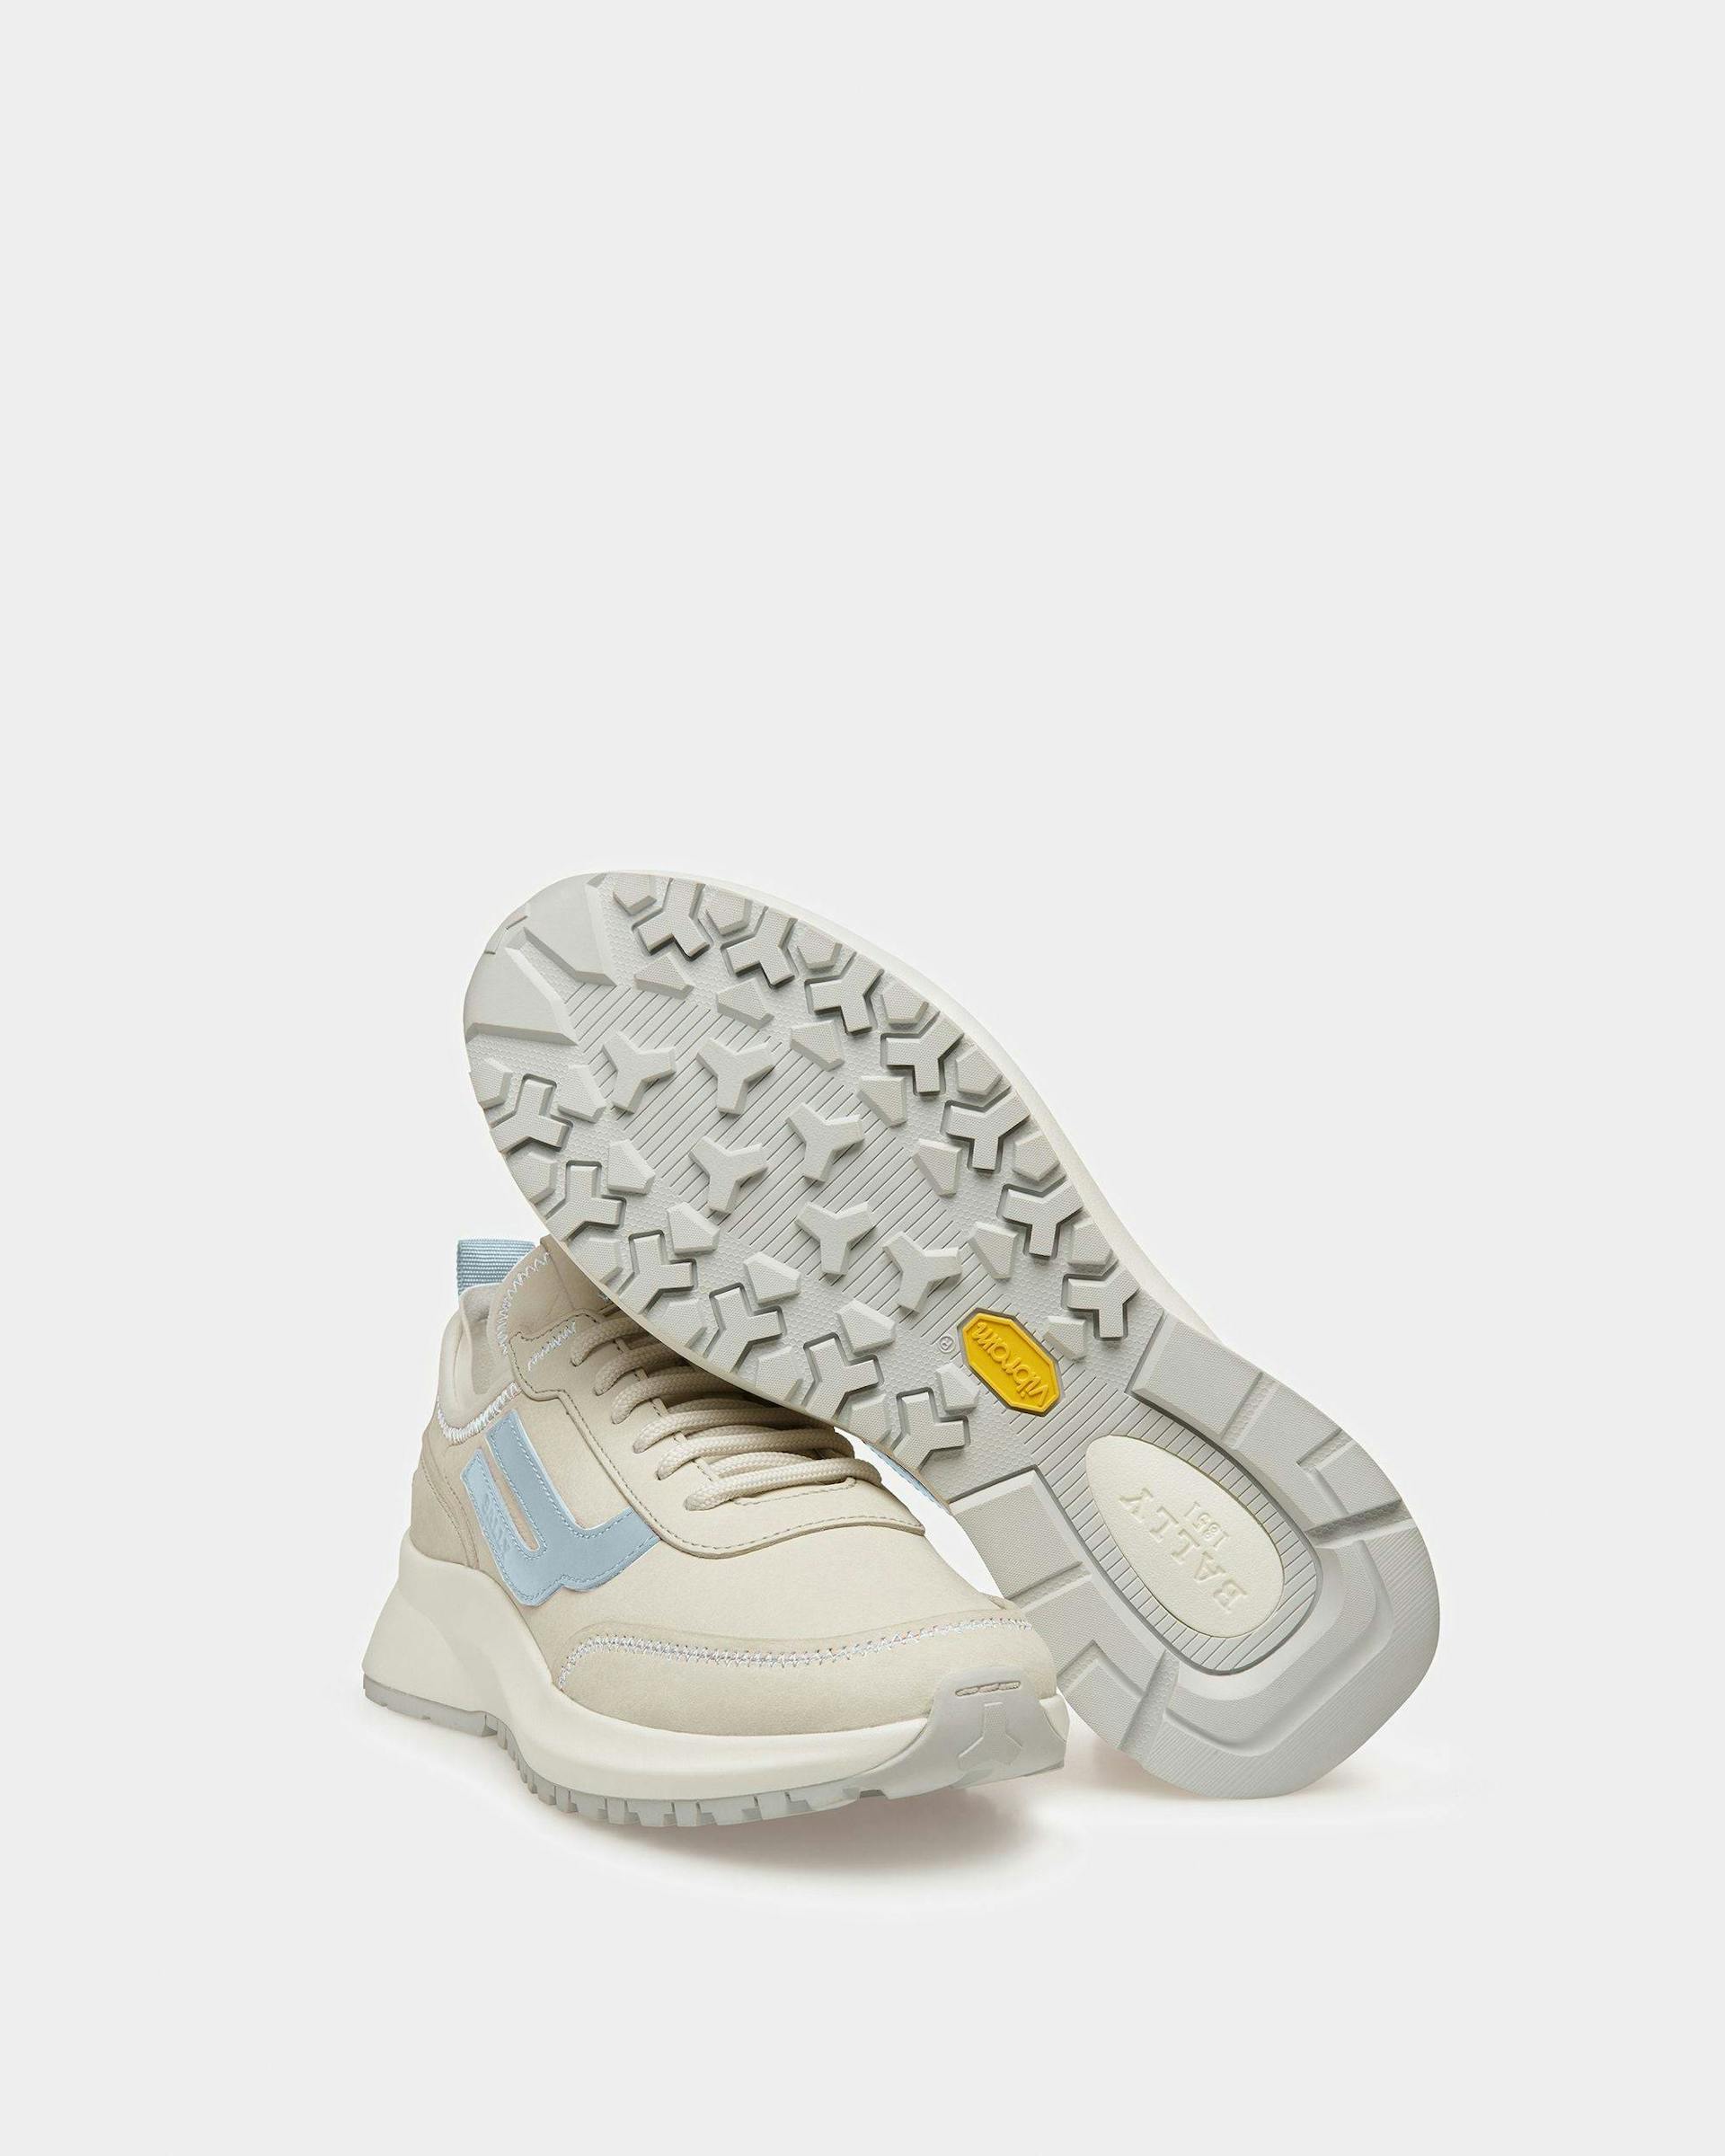 Darys Leather Sneakers In Dusty White And Light Blue - Women's - Bally - 06